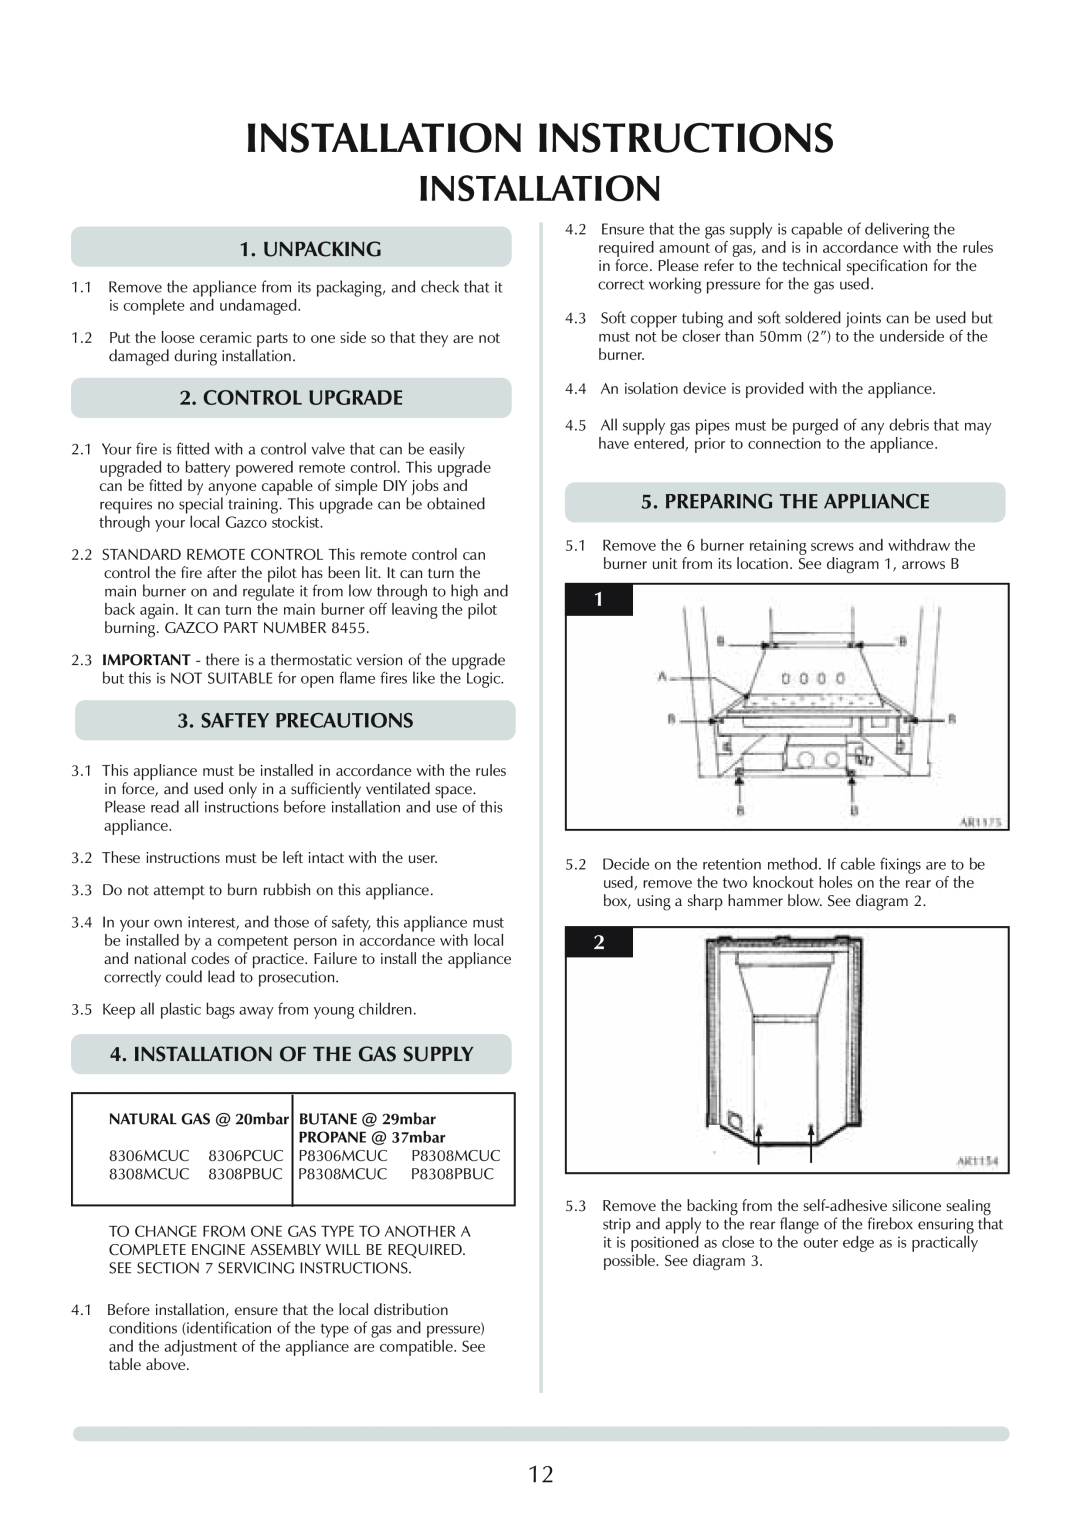 Stovax Logic Hotbox & Convector Fire manual Installation Instructions, Unpacking, Control Upgrade, Saftey Precautions 